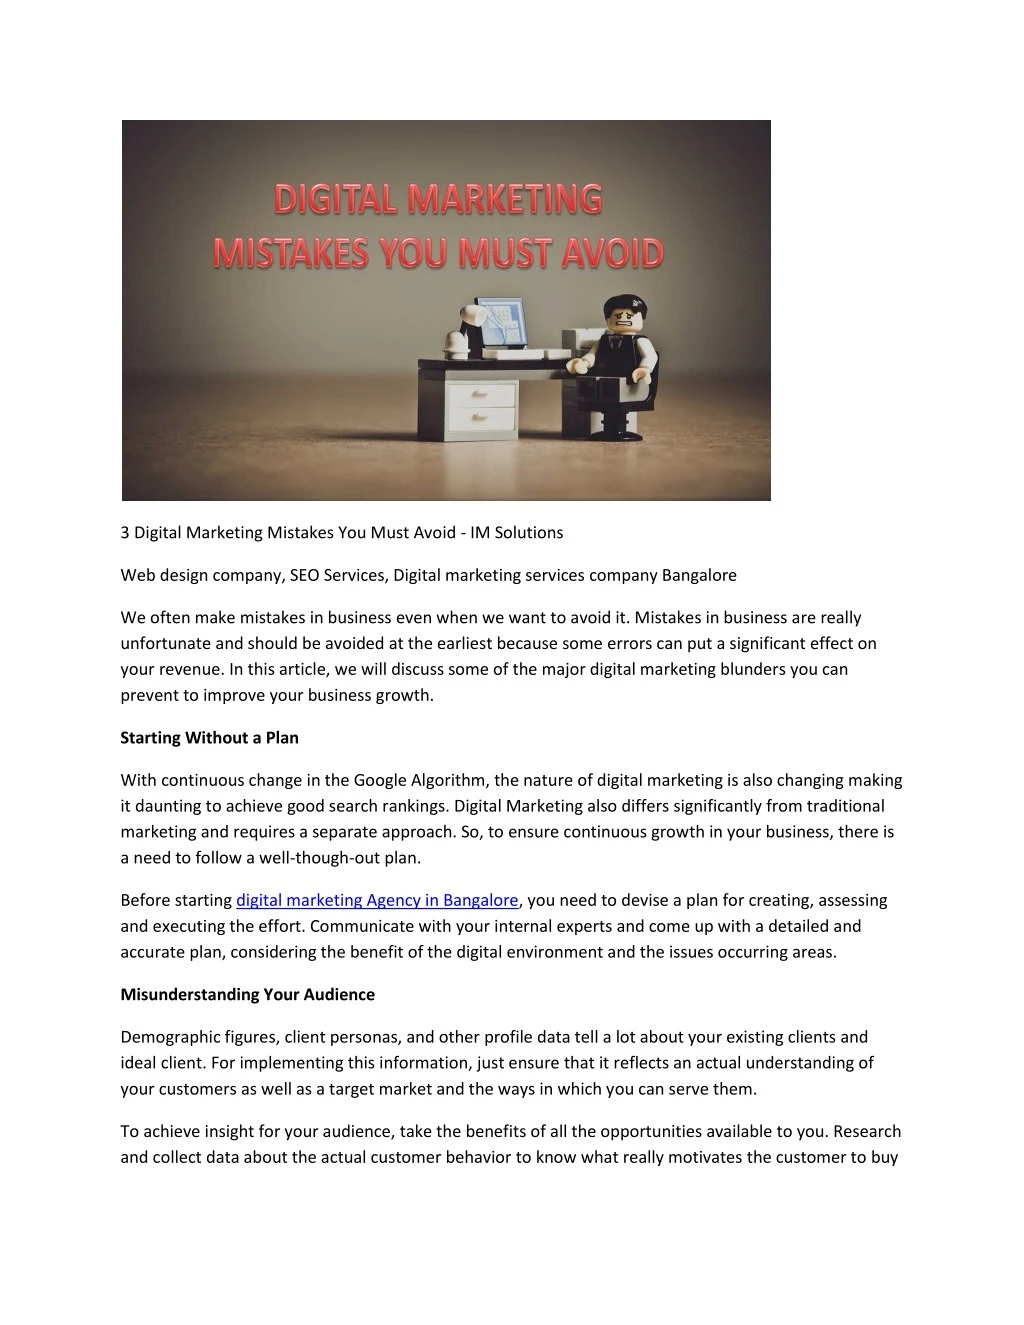 3 digital marketing mistakes you must avoid